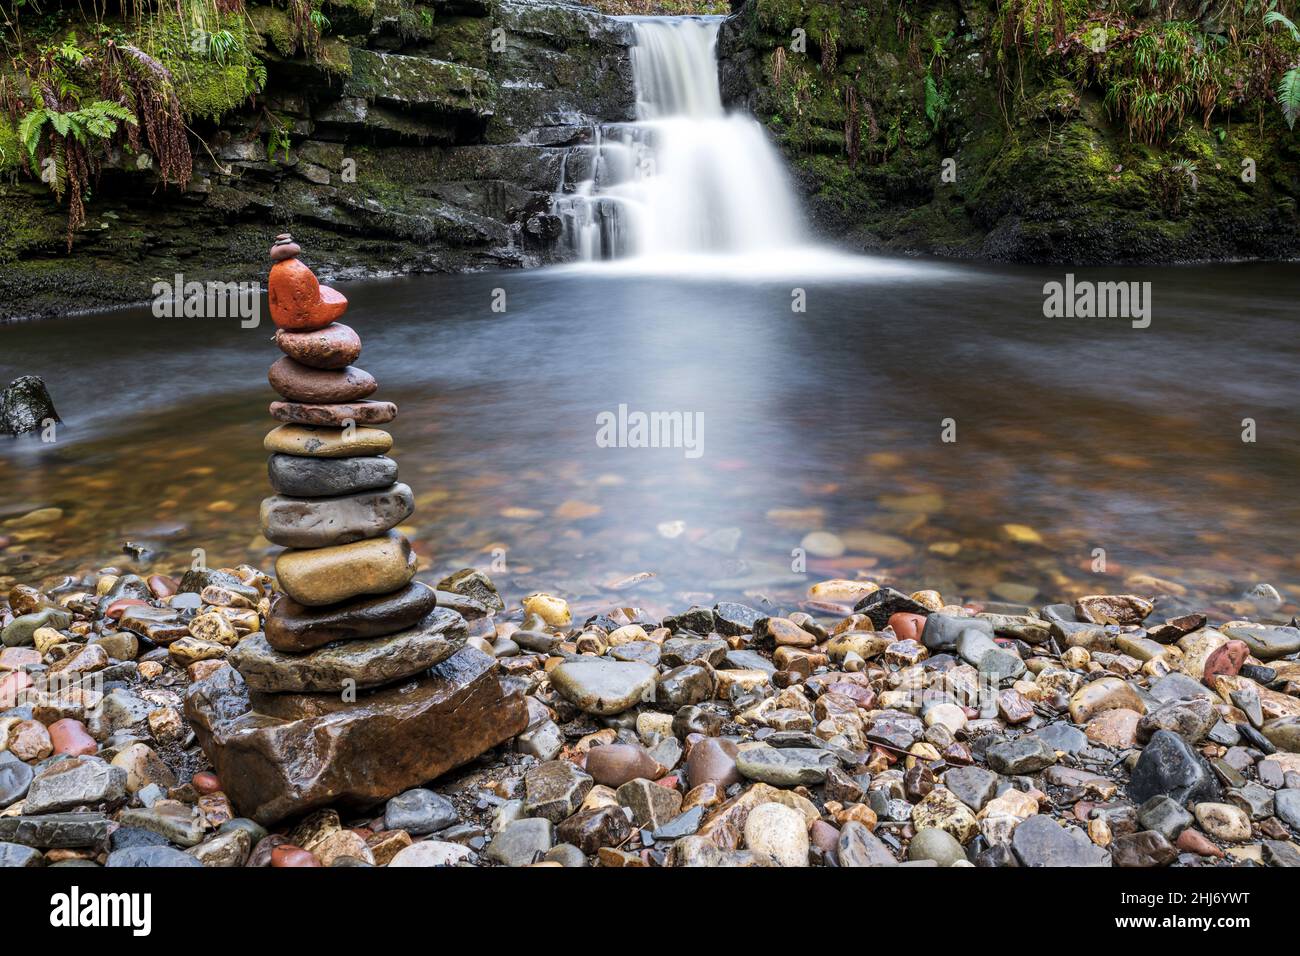 Balanced stone stack with beautiful waterfall background. Stacked rocks balancing art. Environment, ecosystem impact concept. Brecon Beacons, Wales, UK Stock Photo